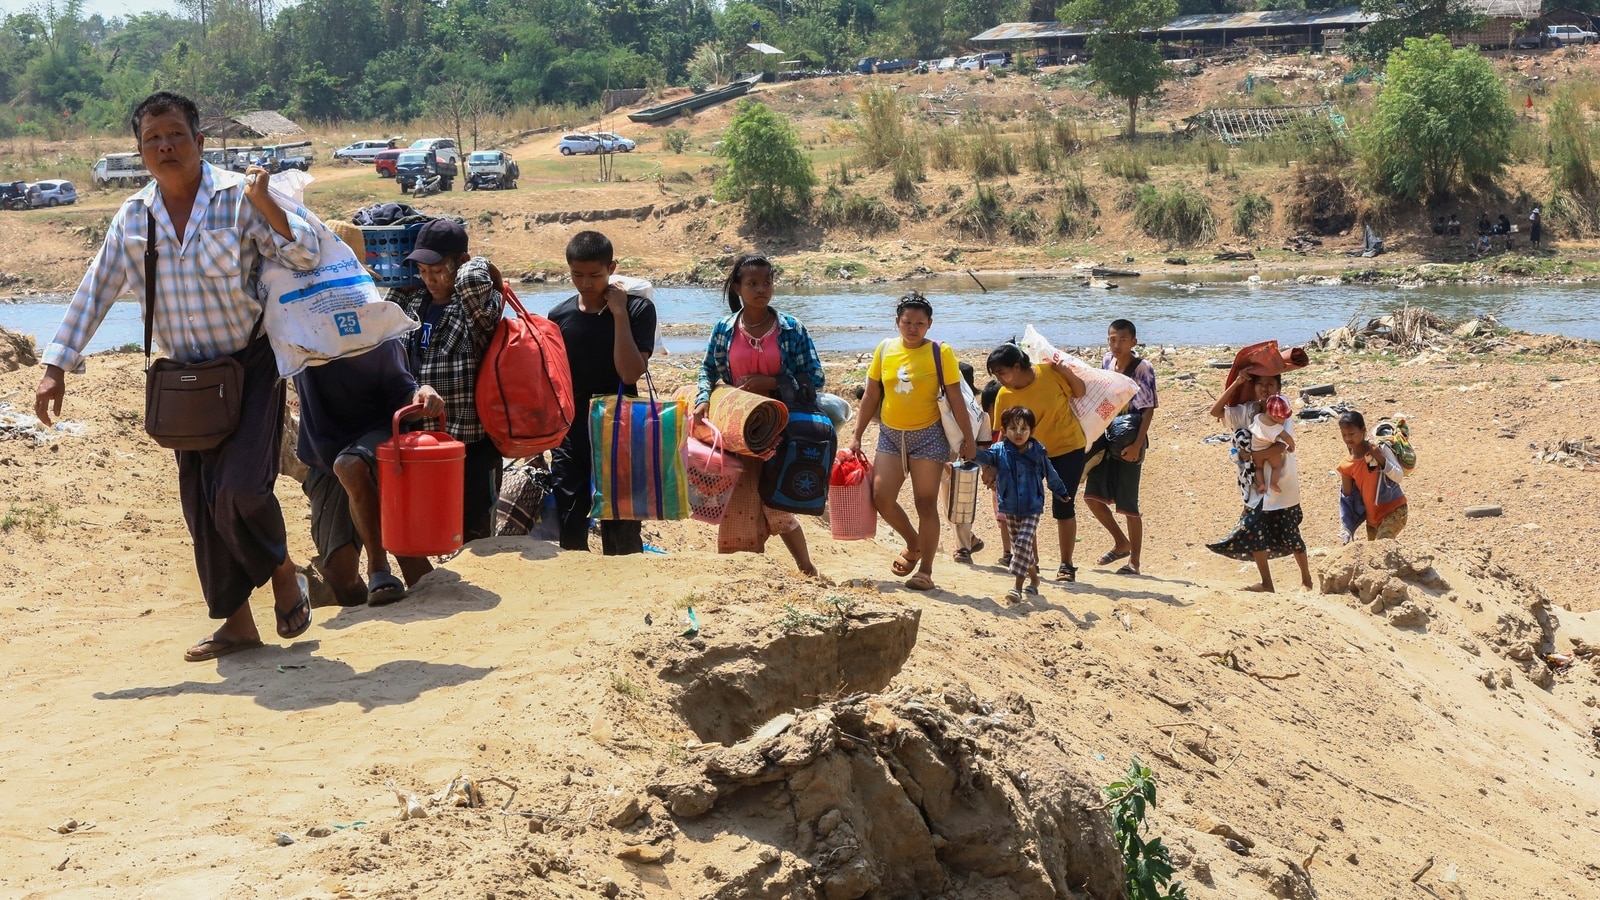 About 1,300 people flee Myanmar to Thailand amid clashes at border town